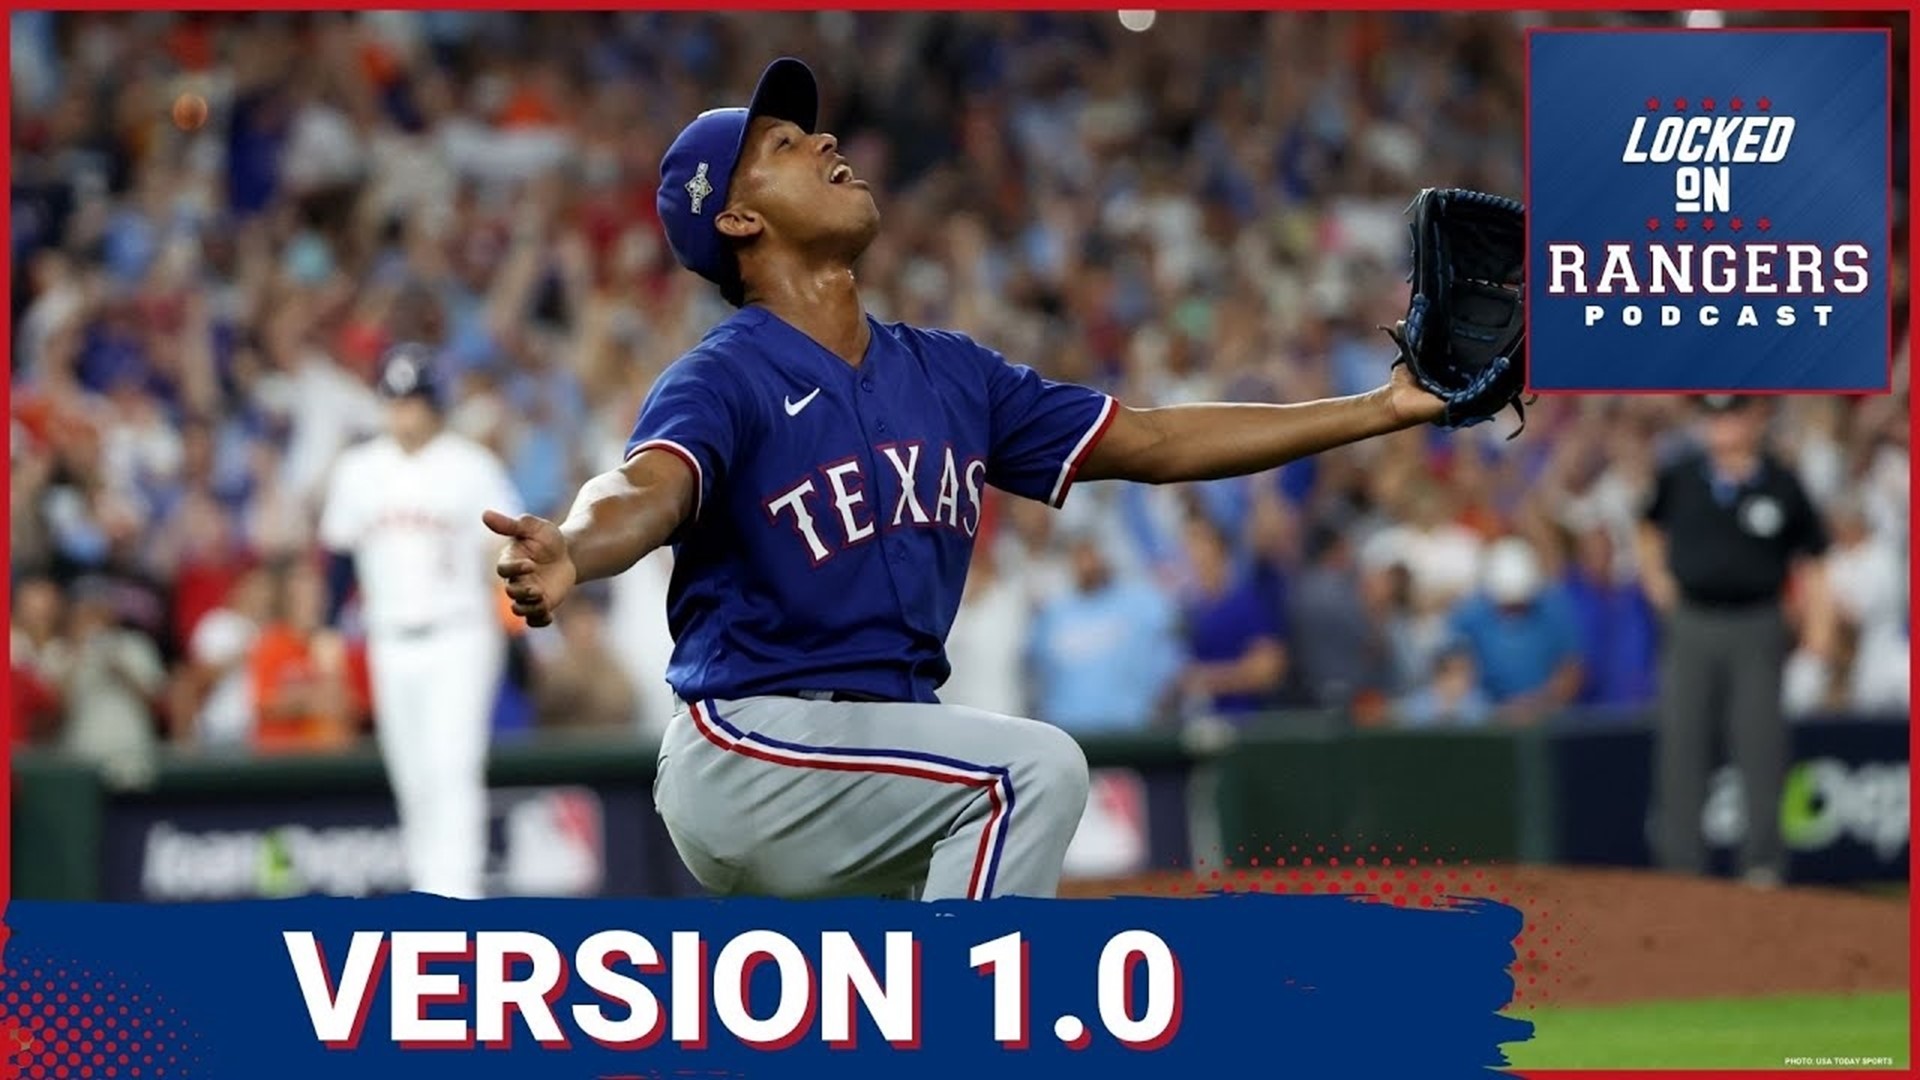 The Texas Rangers are coming off the first championship in franchise history and bring back most of their championship roster.